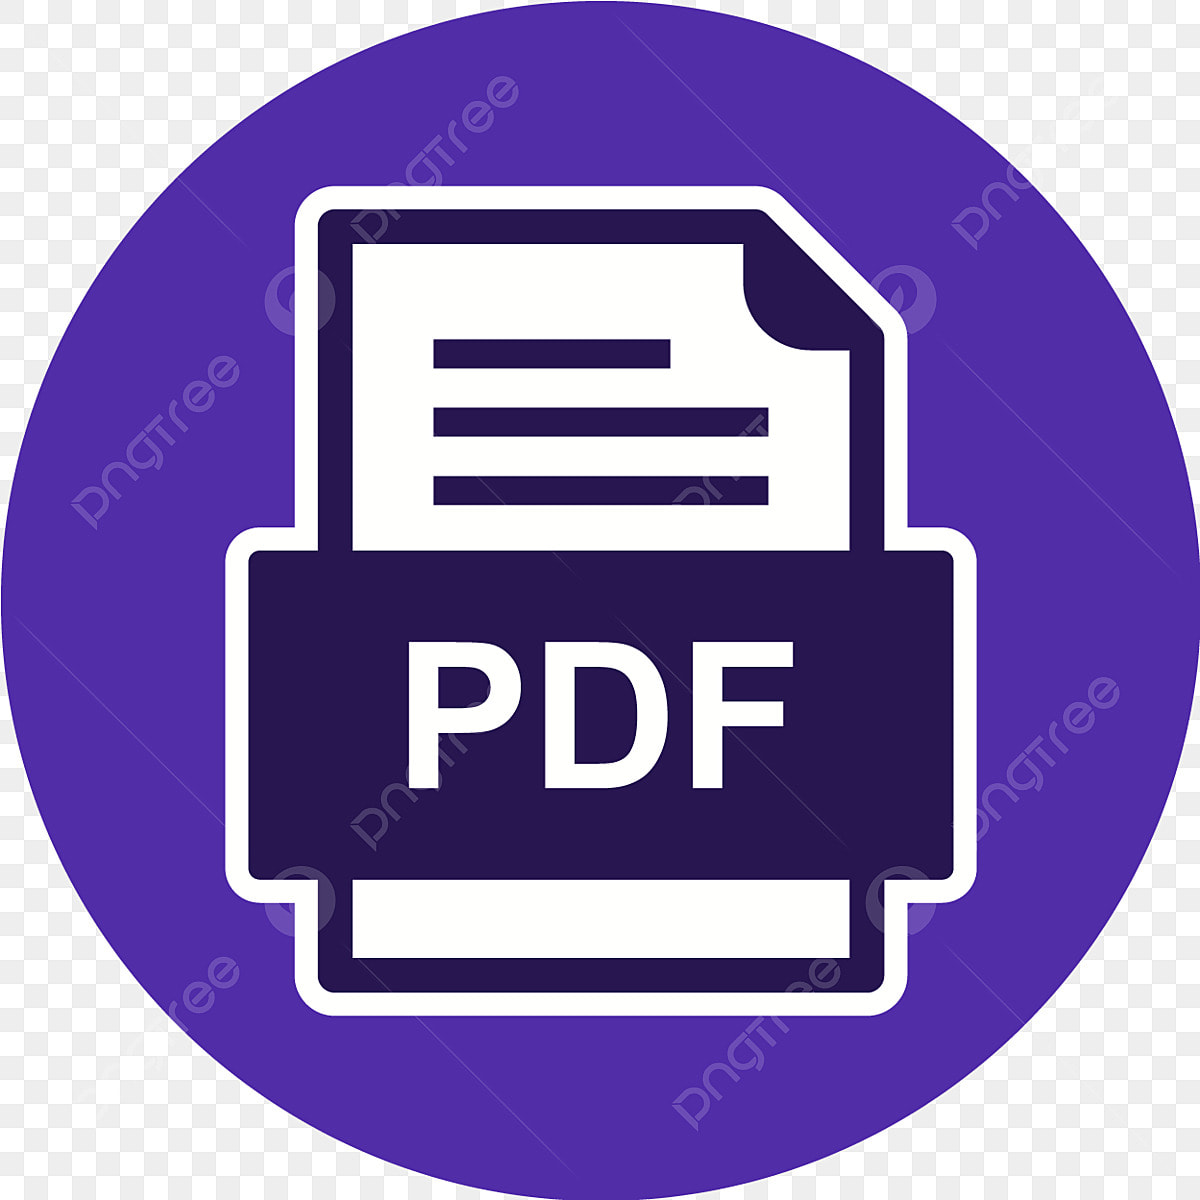 Pngtree Pdf File Document Icon Png Image 4174933